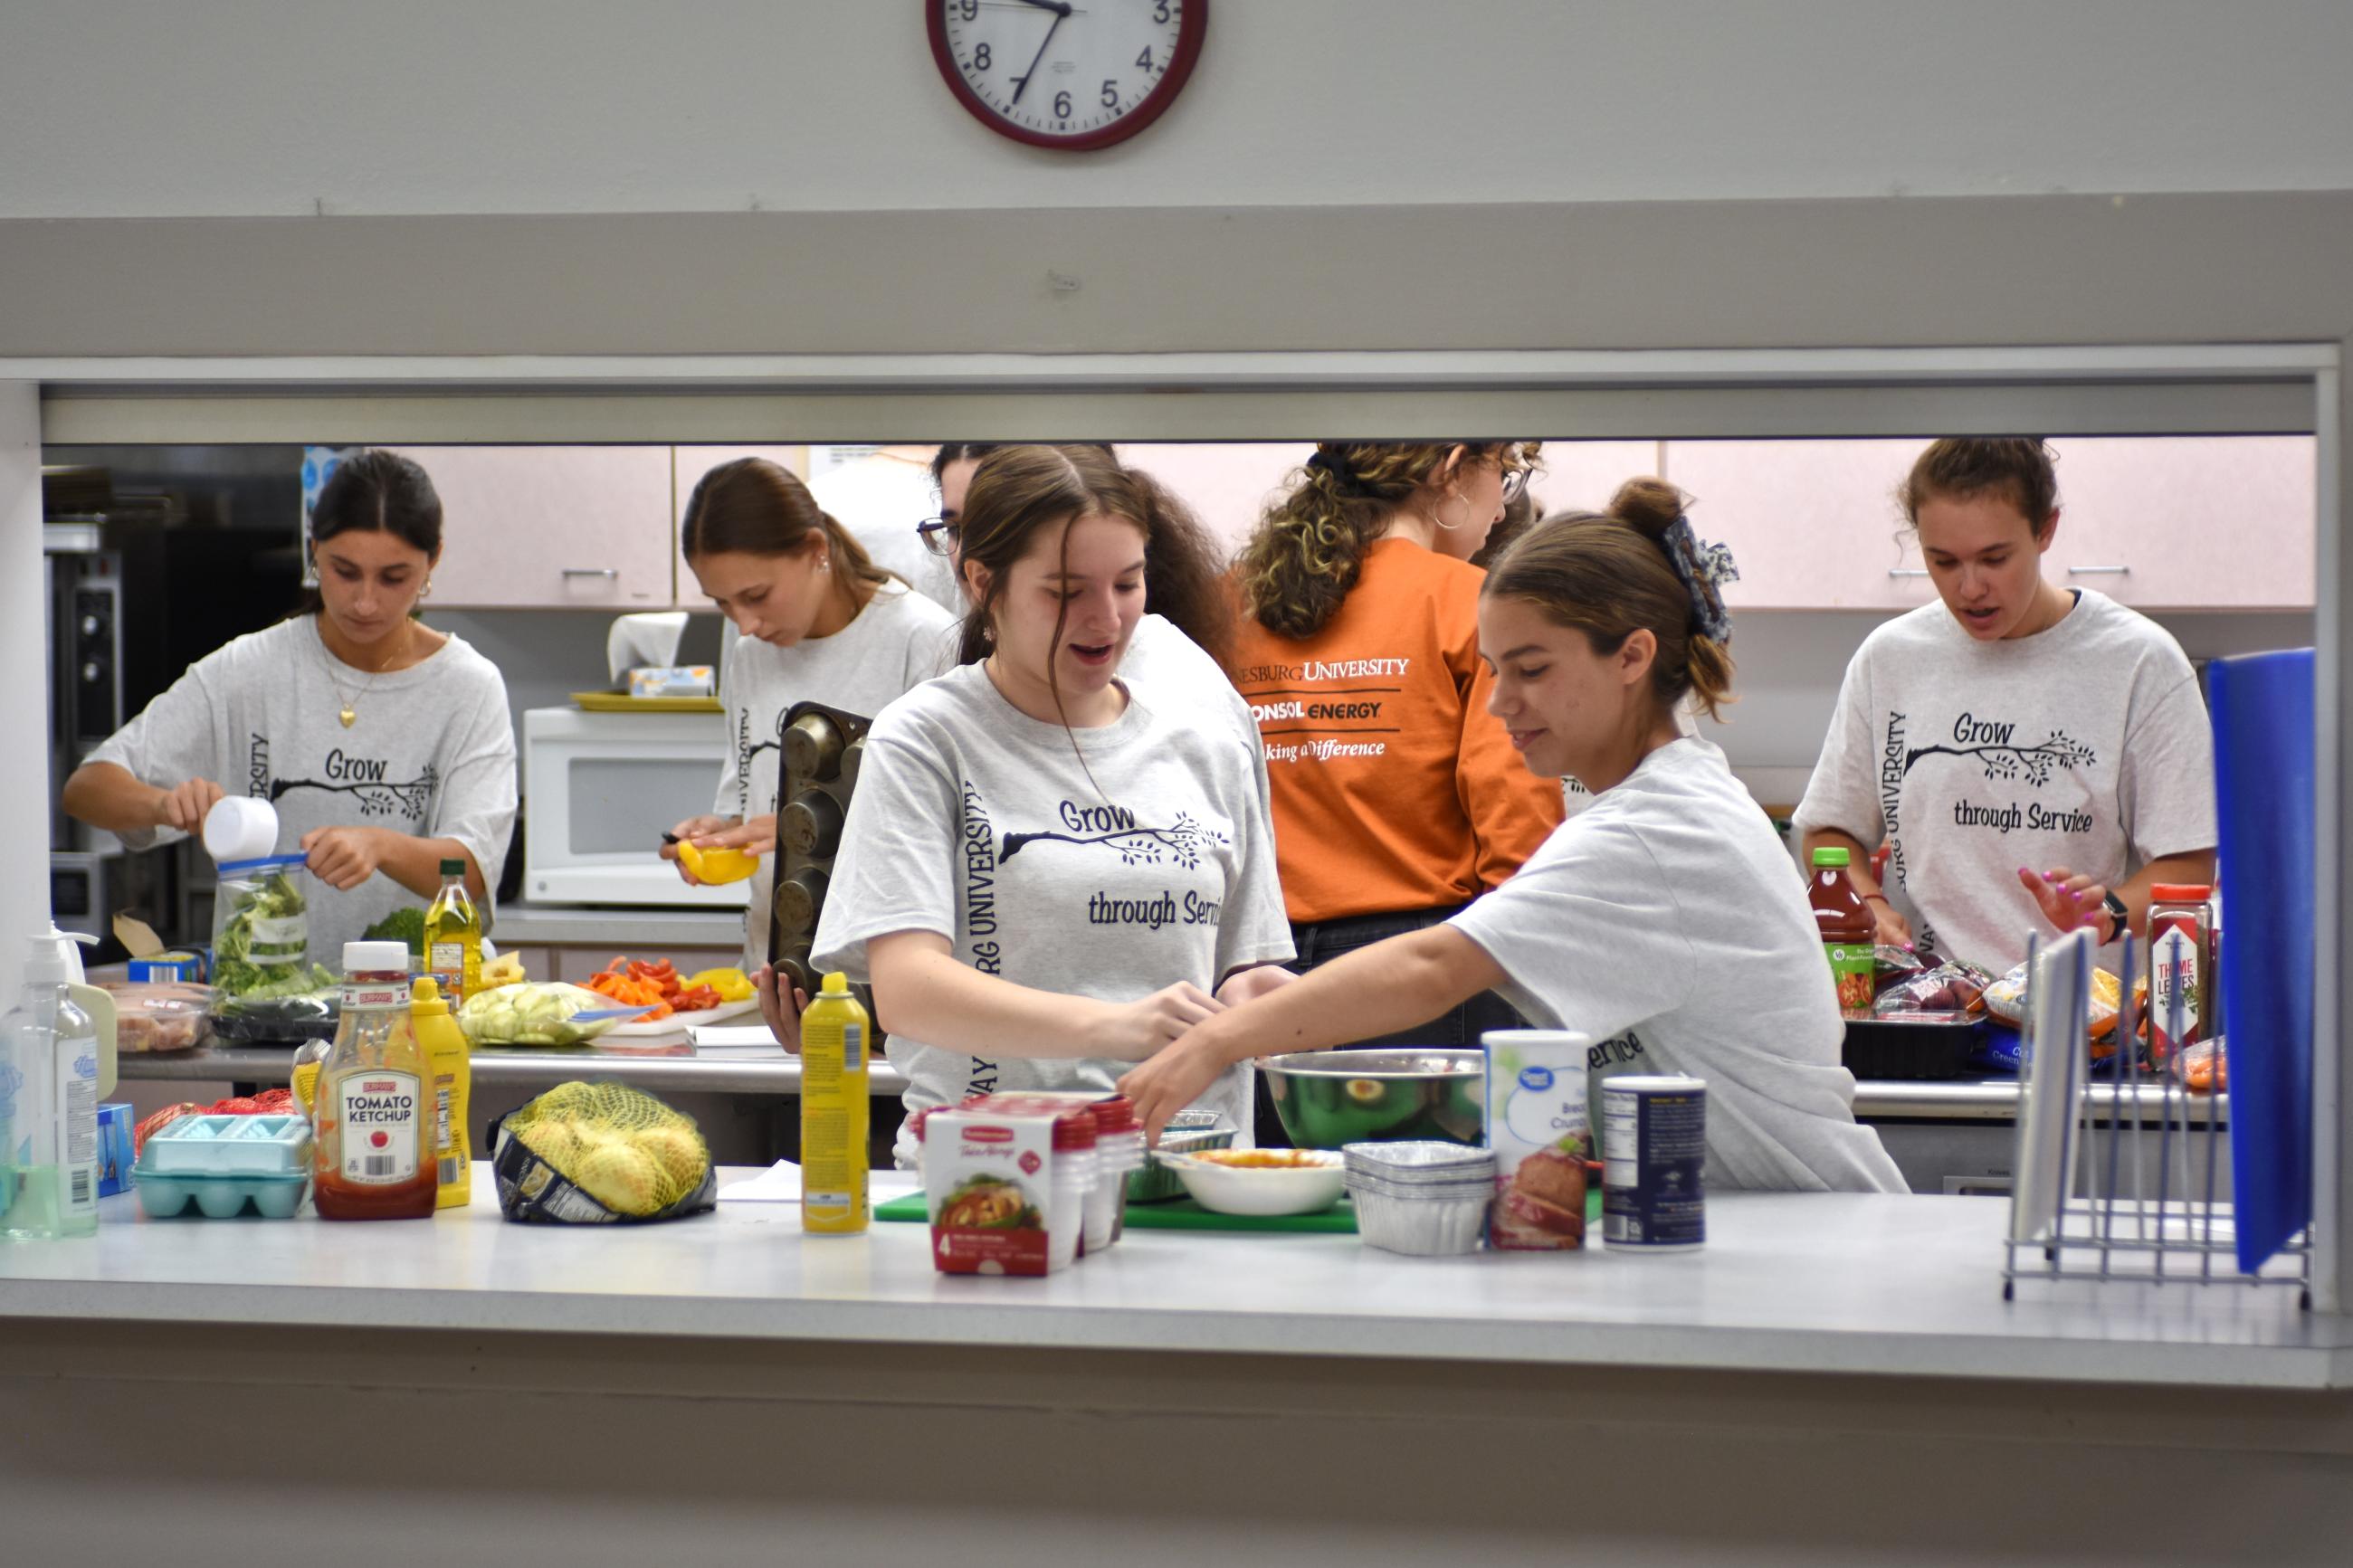 students working in a kitchen during service day